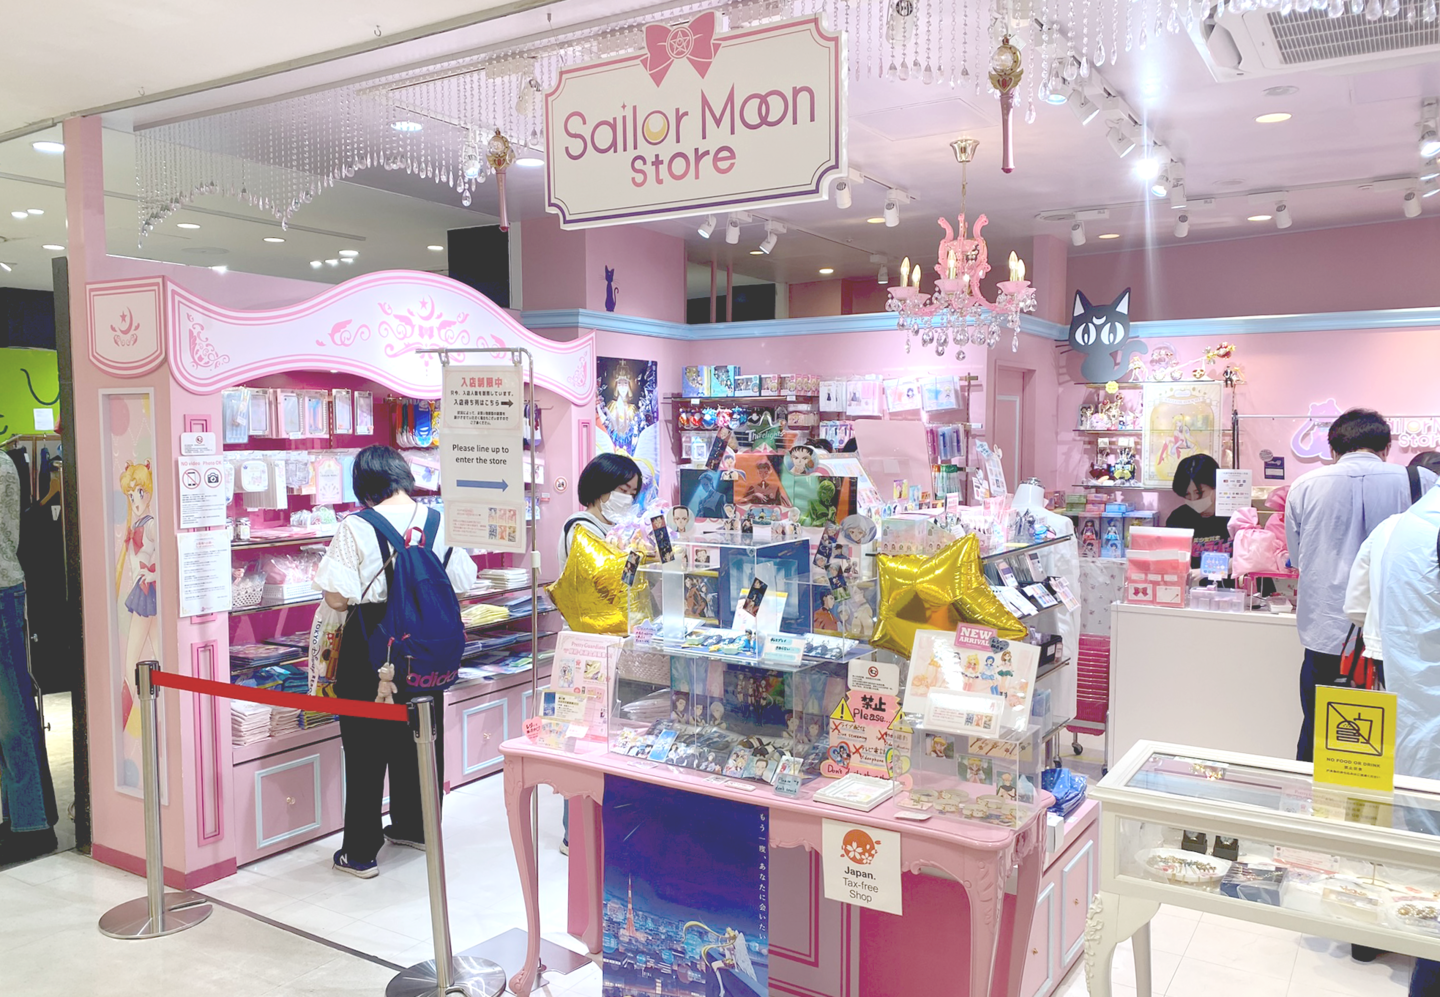 Exterior images of the Sailor Moon Store in Harajuku, Tokyo